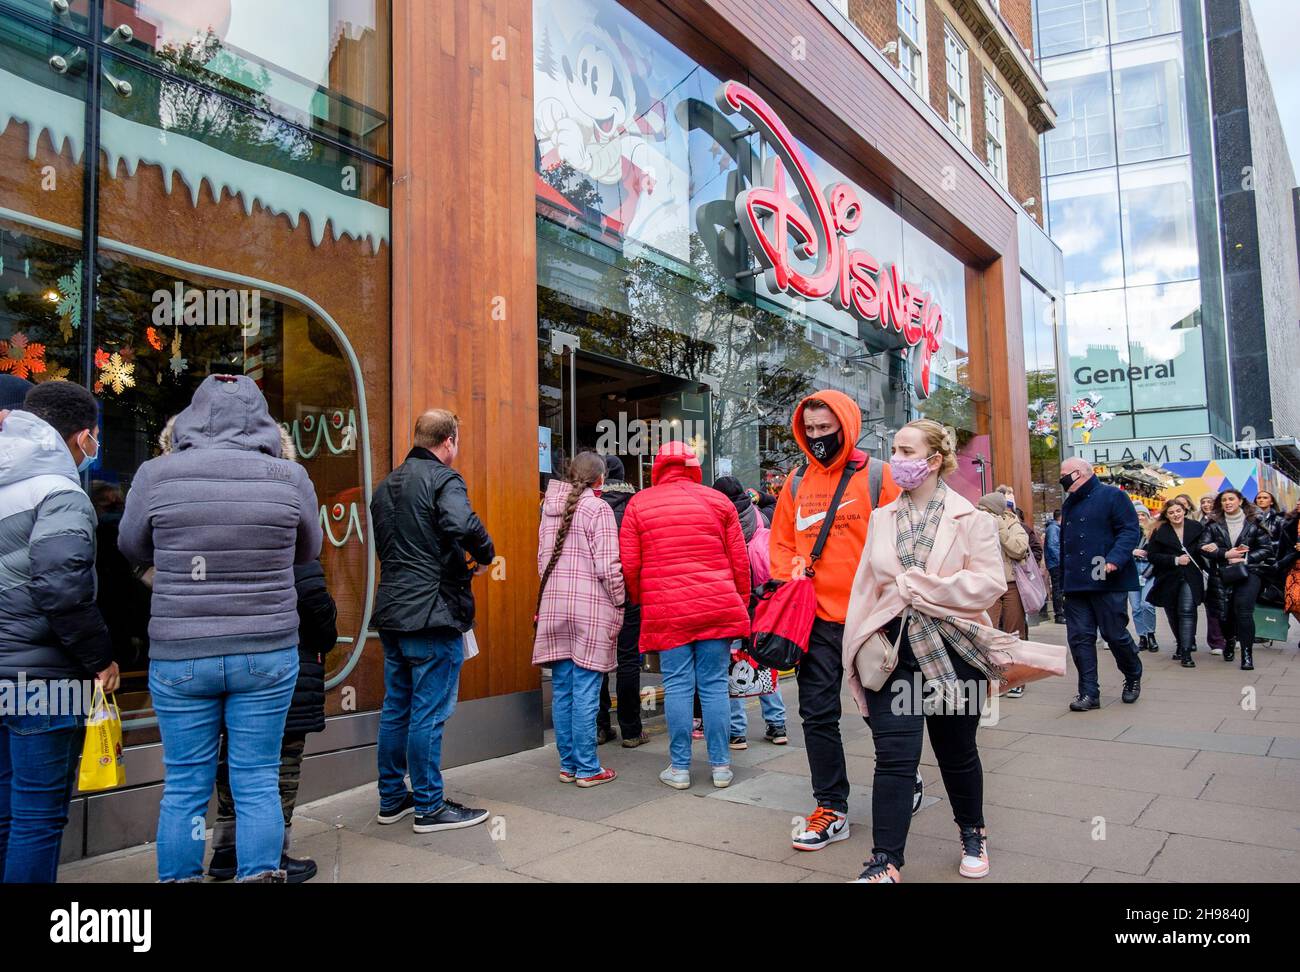 Christmas shoppers queue to enter the Disney store on London's Oxford street. The UK government reimposed measures making it a legal requirement to wear face coverings in shops and on public transport unless exempt from 30th November amidst concerns over the Omicron variant of covid-19. Stock Photo